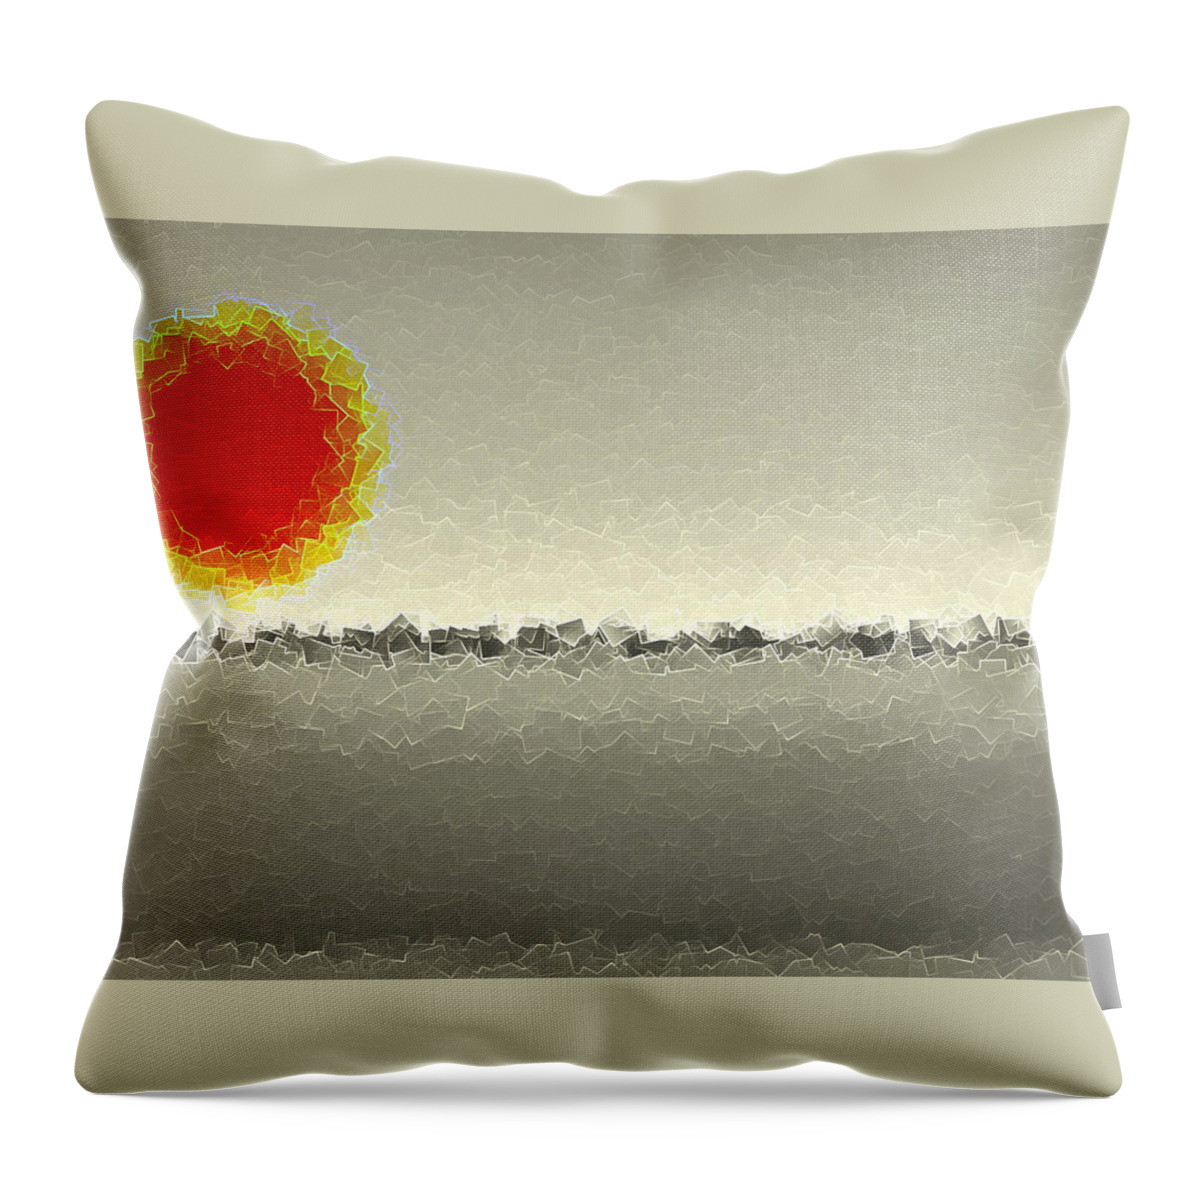 Art Throw Pillow featuring the digital art Gibbing-flat by Jeff Iverson